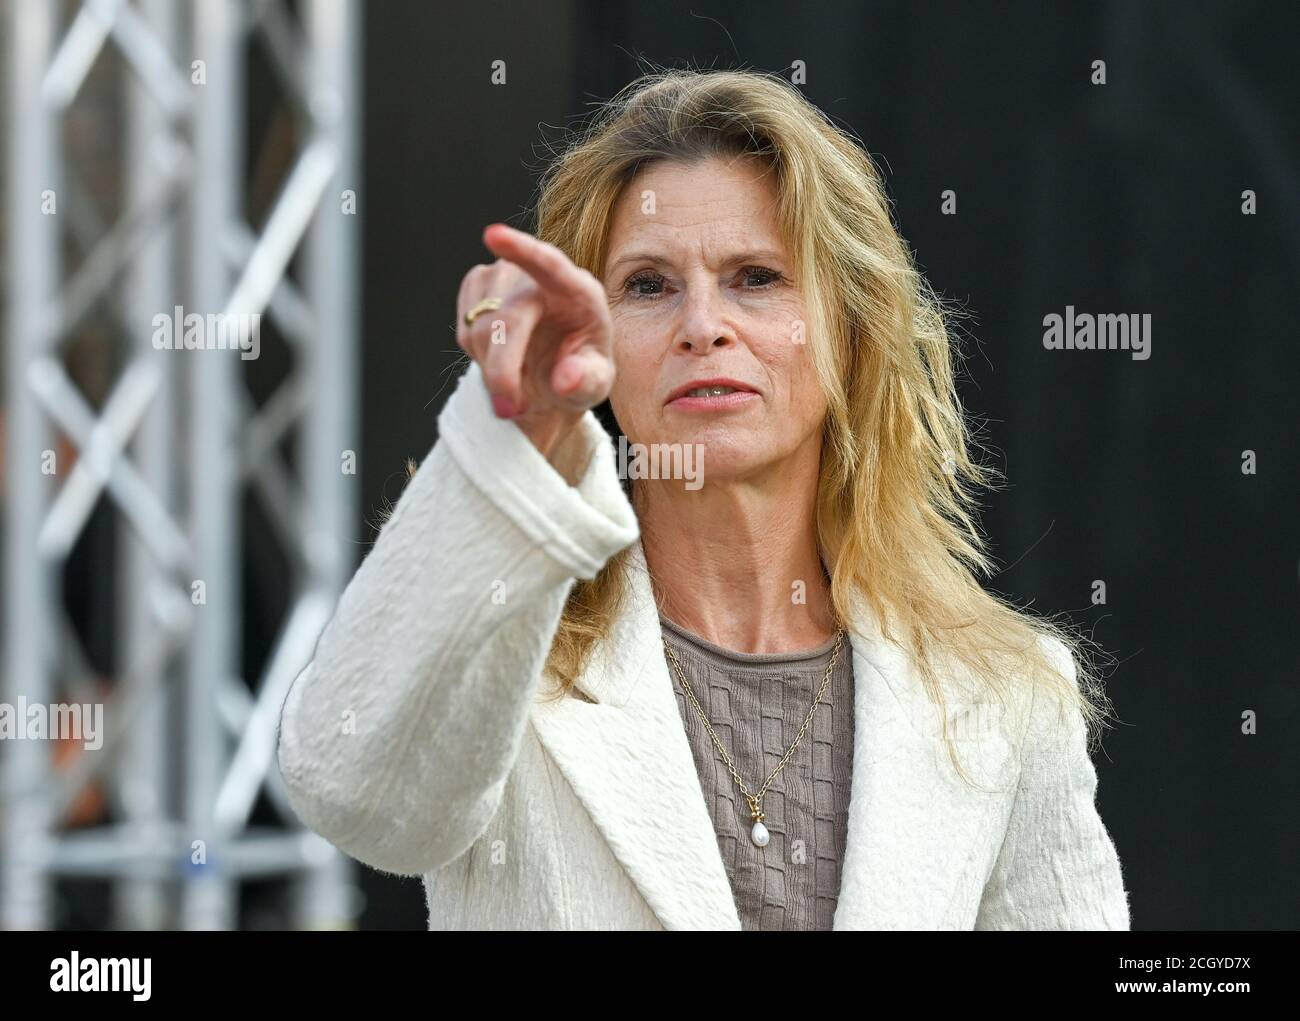 11 September 2020, Berlin: Actress Leslie Malton comes to the Spindler and Klatt for the German Acting Prize awards. The award has been presented by the Bundesverband Schauspiel (BFFS) since 2012. Photo: Jens Kalaene/dpa-Zentralbild/ZB Stock Photo